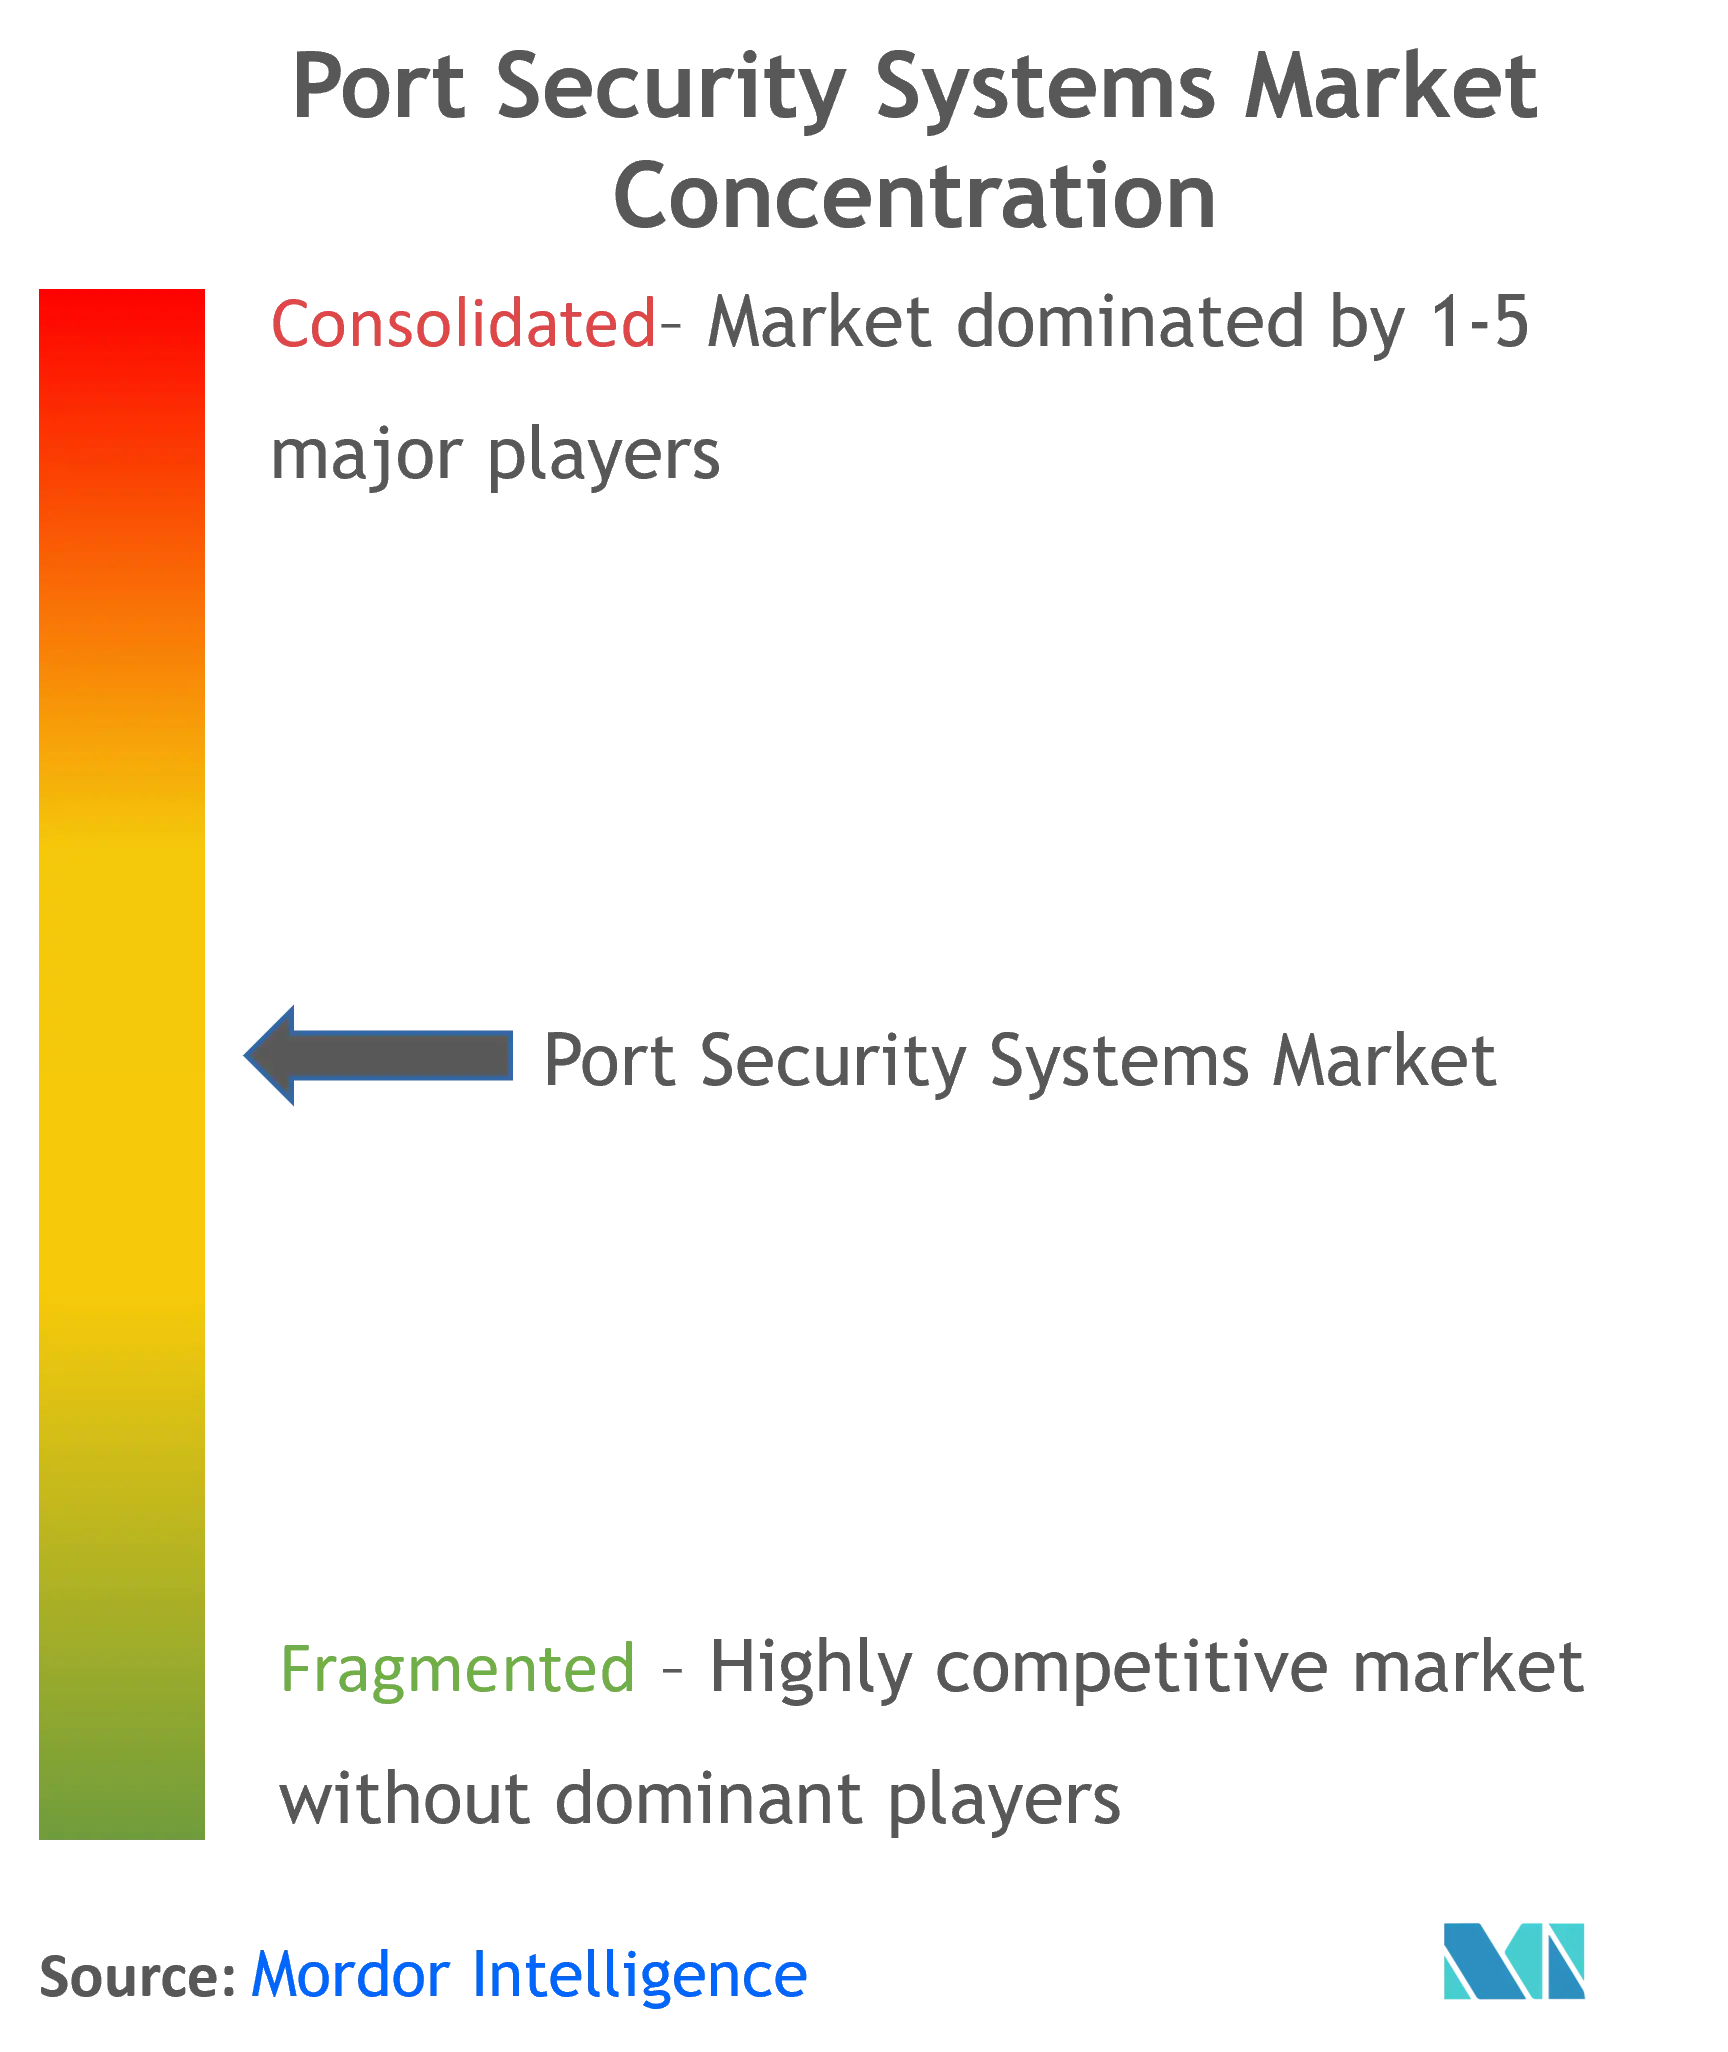 Port Security Systems Market Concentration